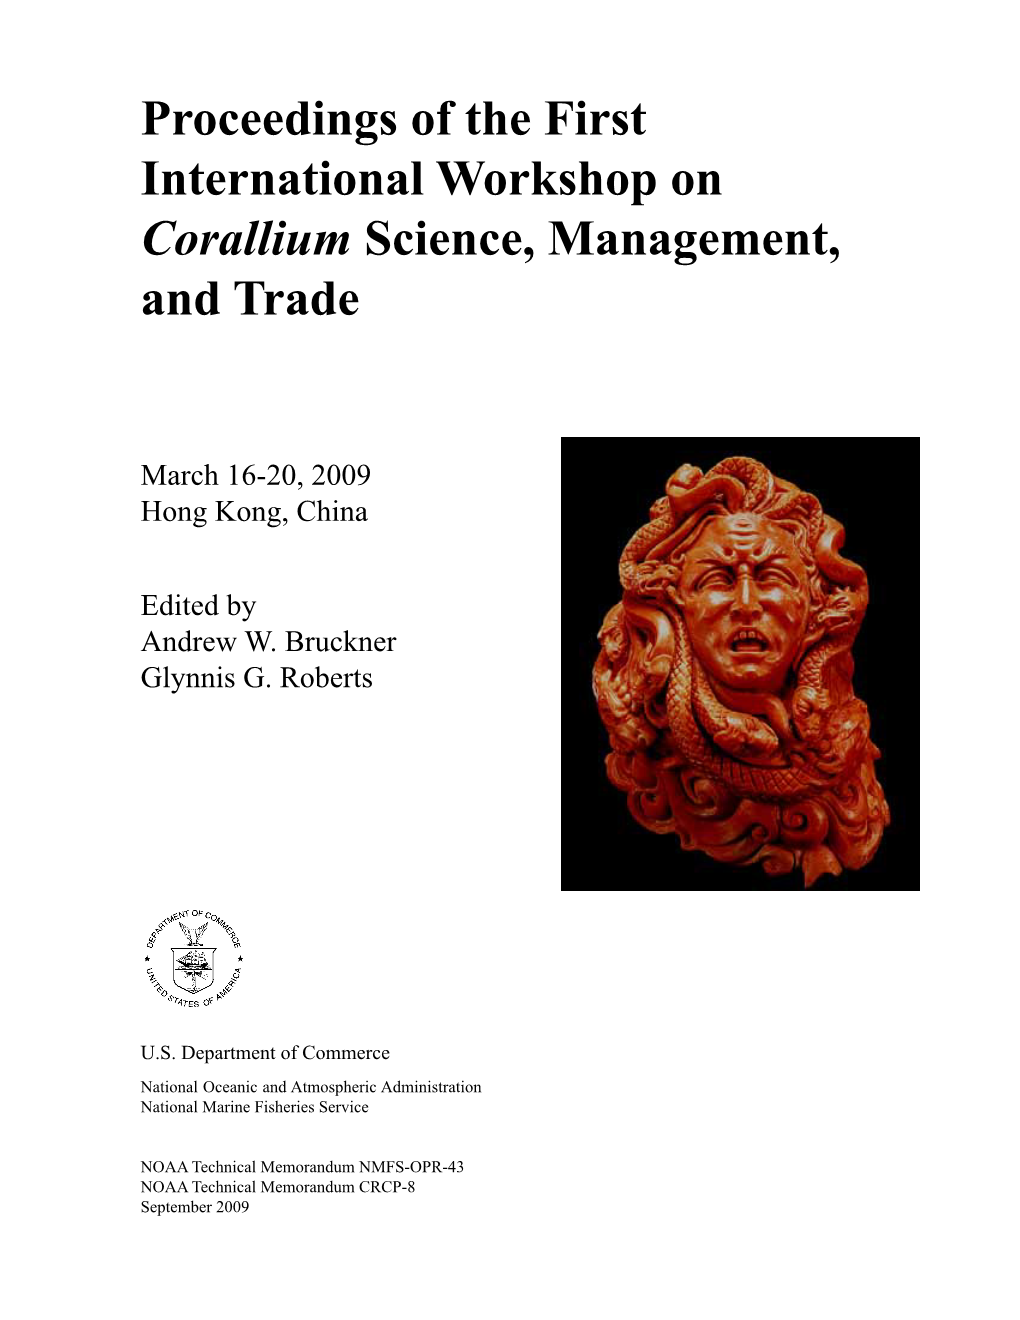 Proceedings of the First International Workshop on Corallium Science, Management, and Trade